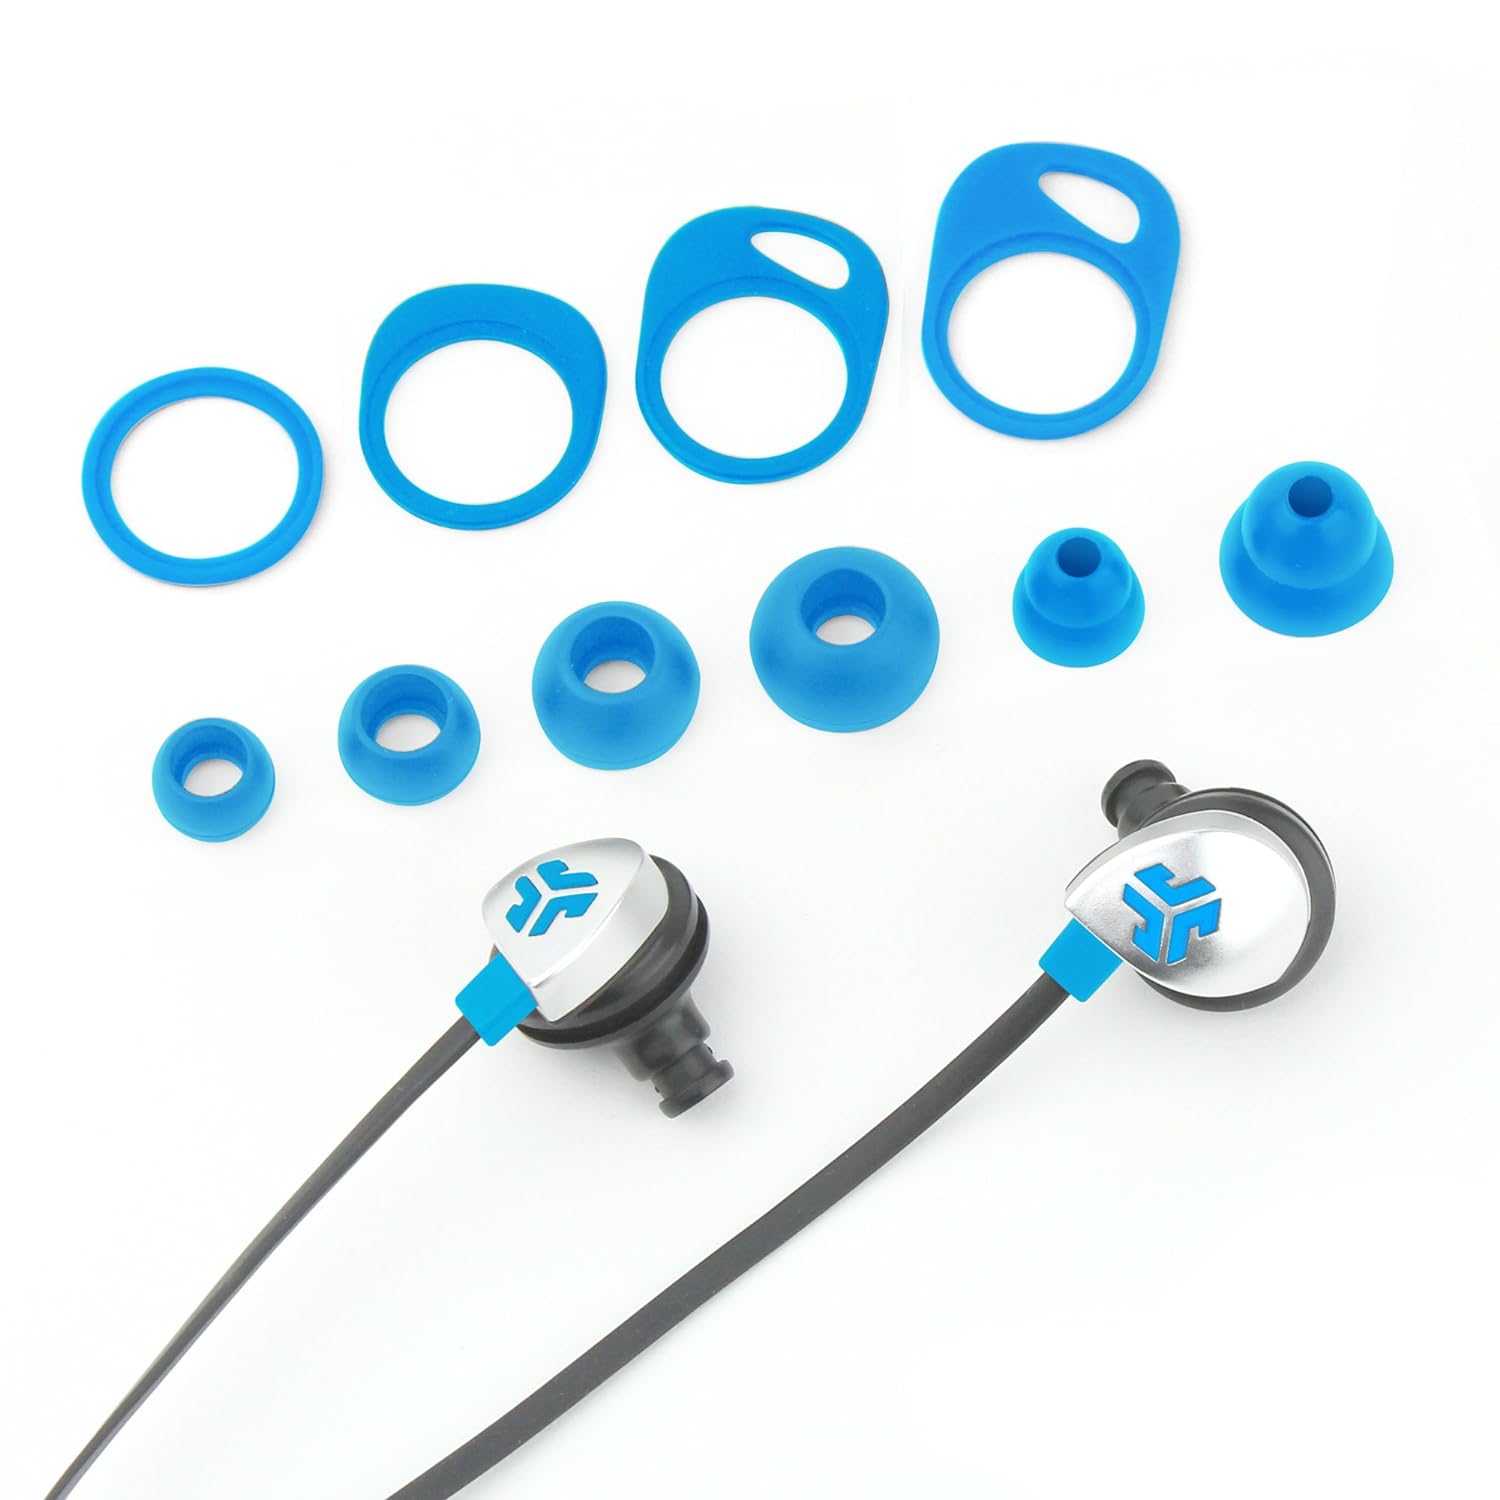 JLab JBuds Epic Earbuds with 13mm C3 Massive Drivers and Customizable Cush Fins - Blue/Gray